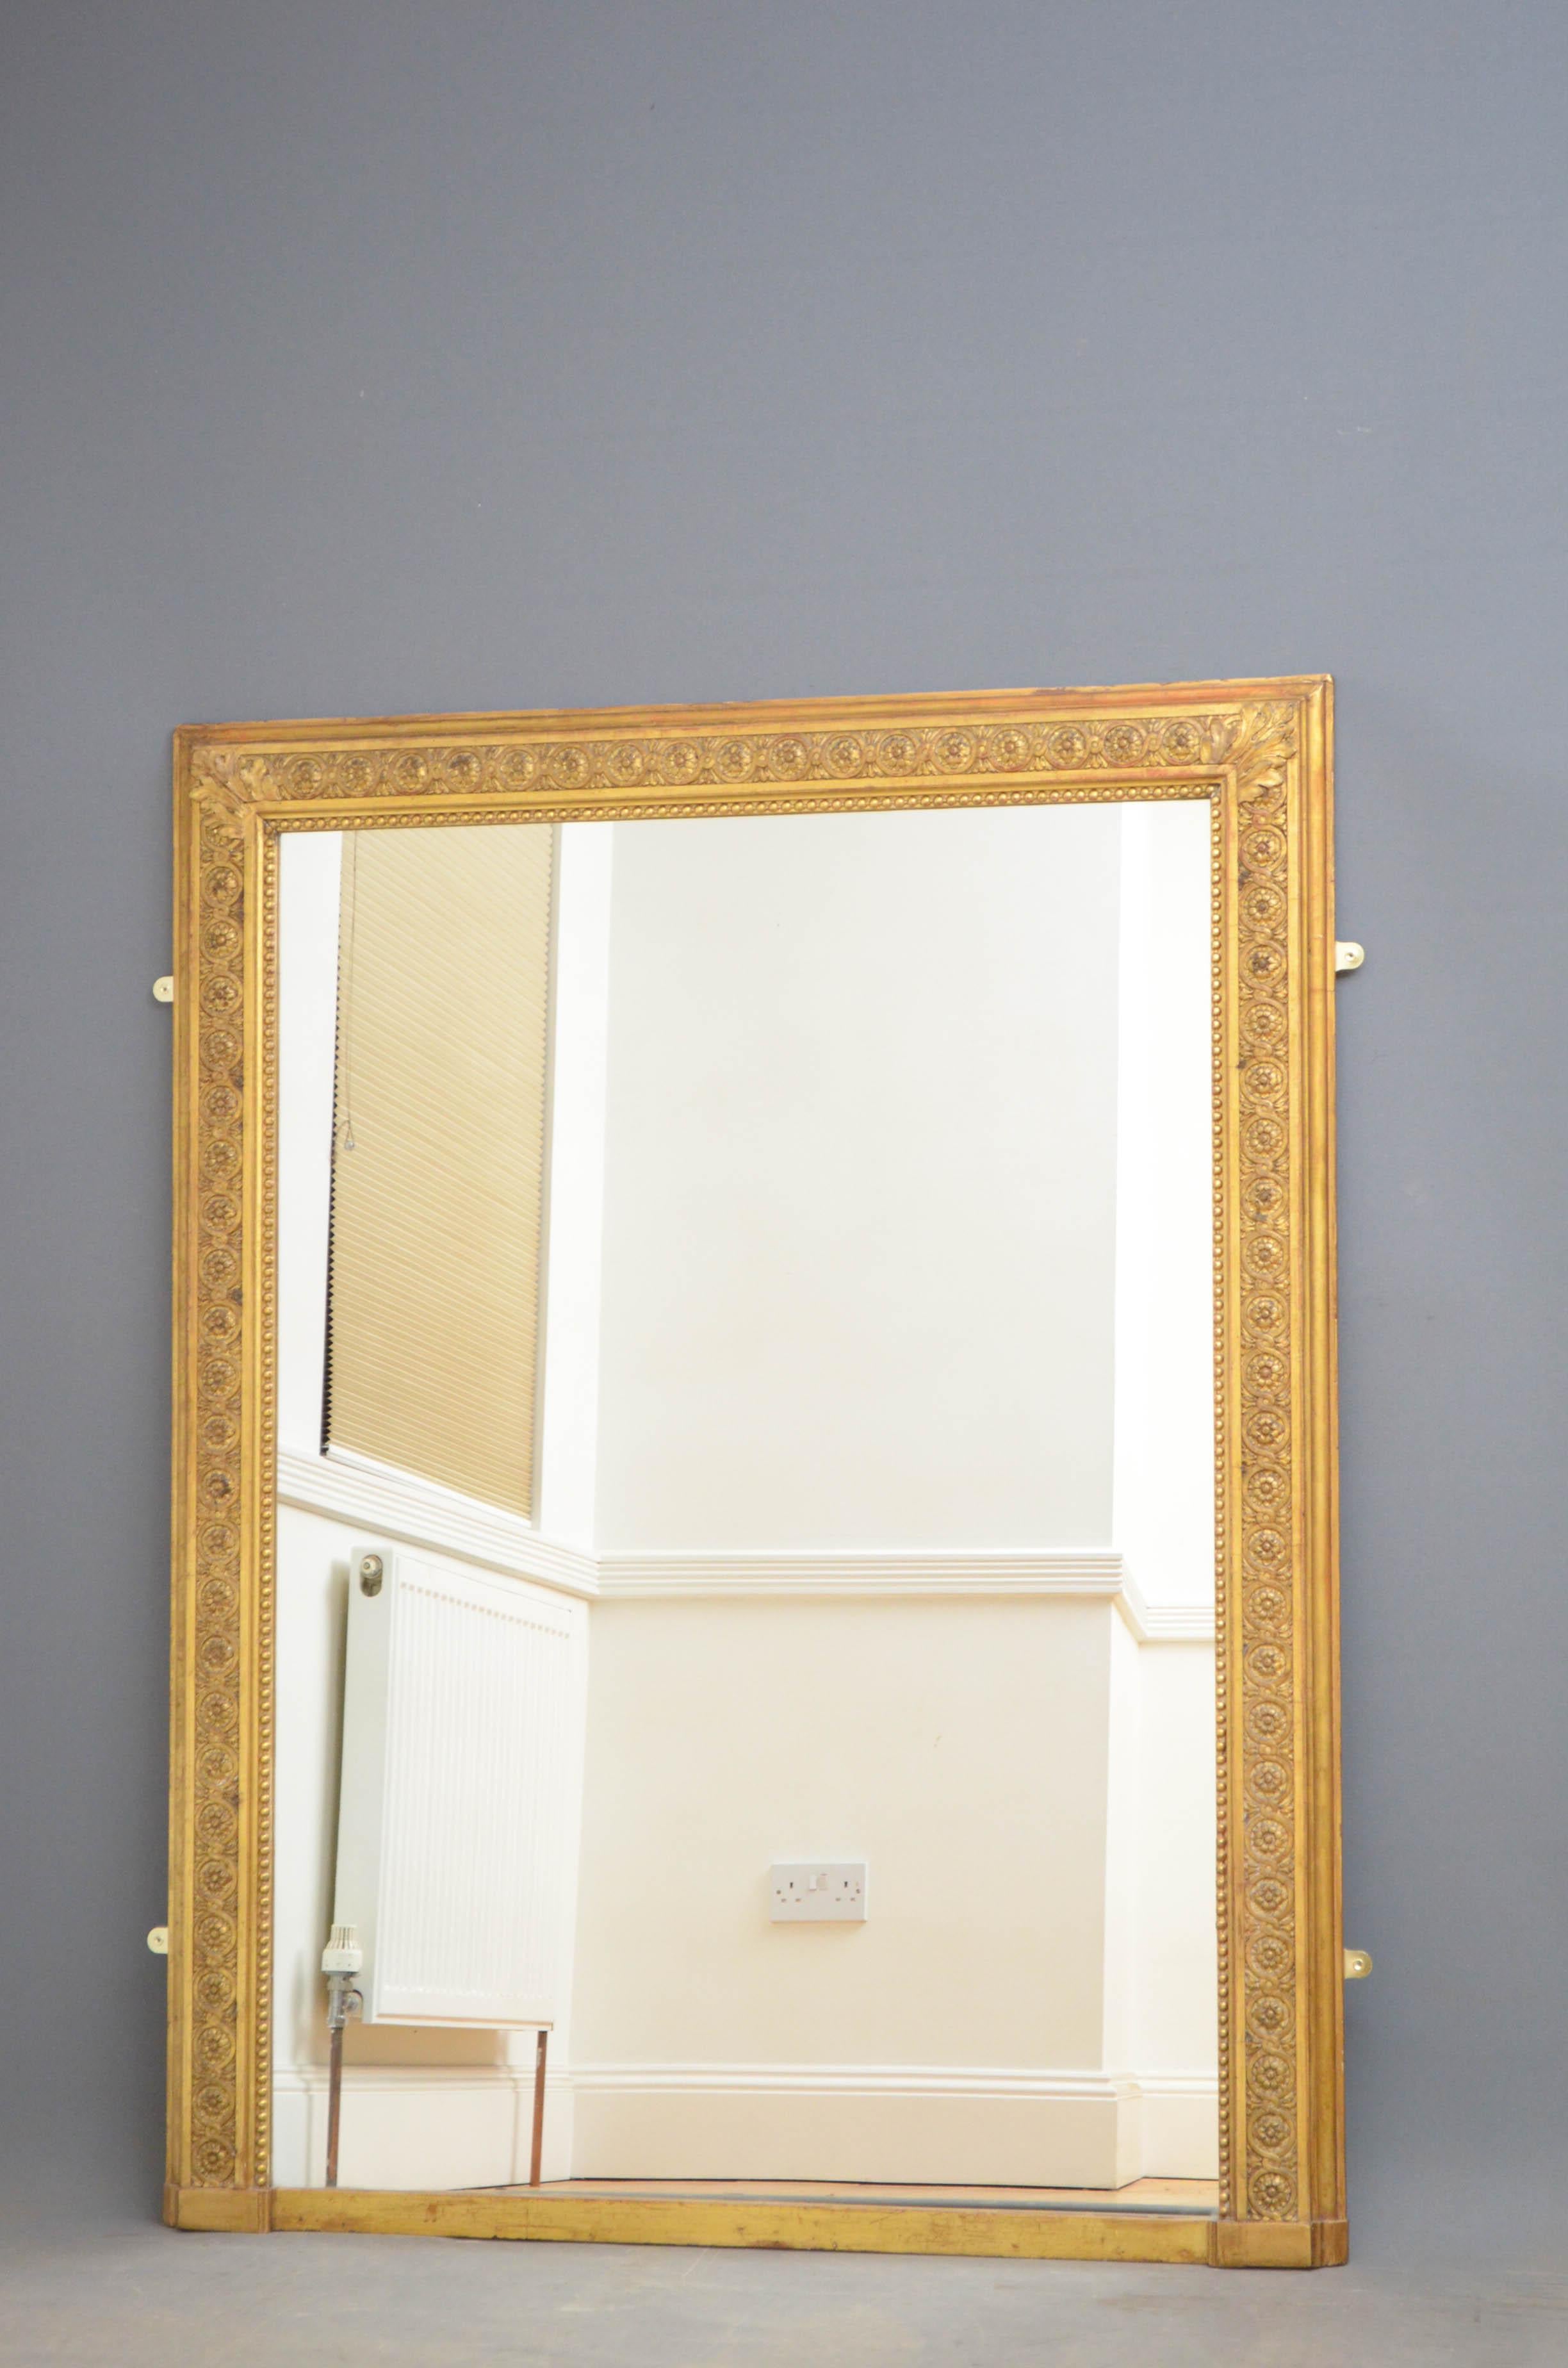 Sn4839, attractive 19th century giltwood mirror, having a replacement glass in good condition in beaded and flower carved frame with moulded edge and acanthus leaf decoration to the top. This antique mirror retain its original gilt and backboards,